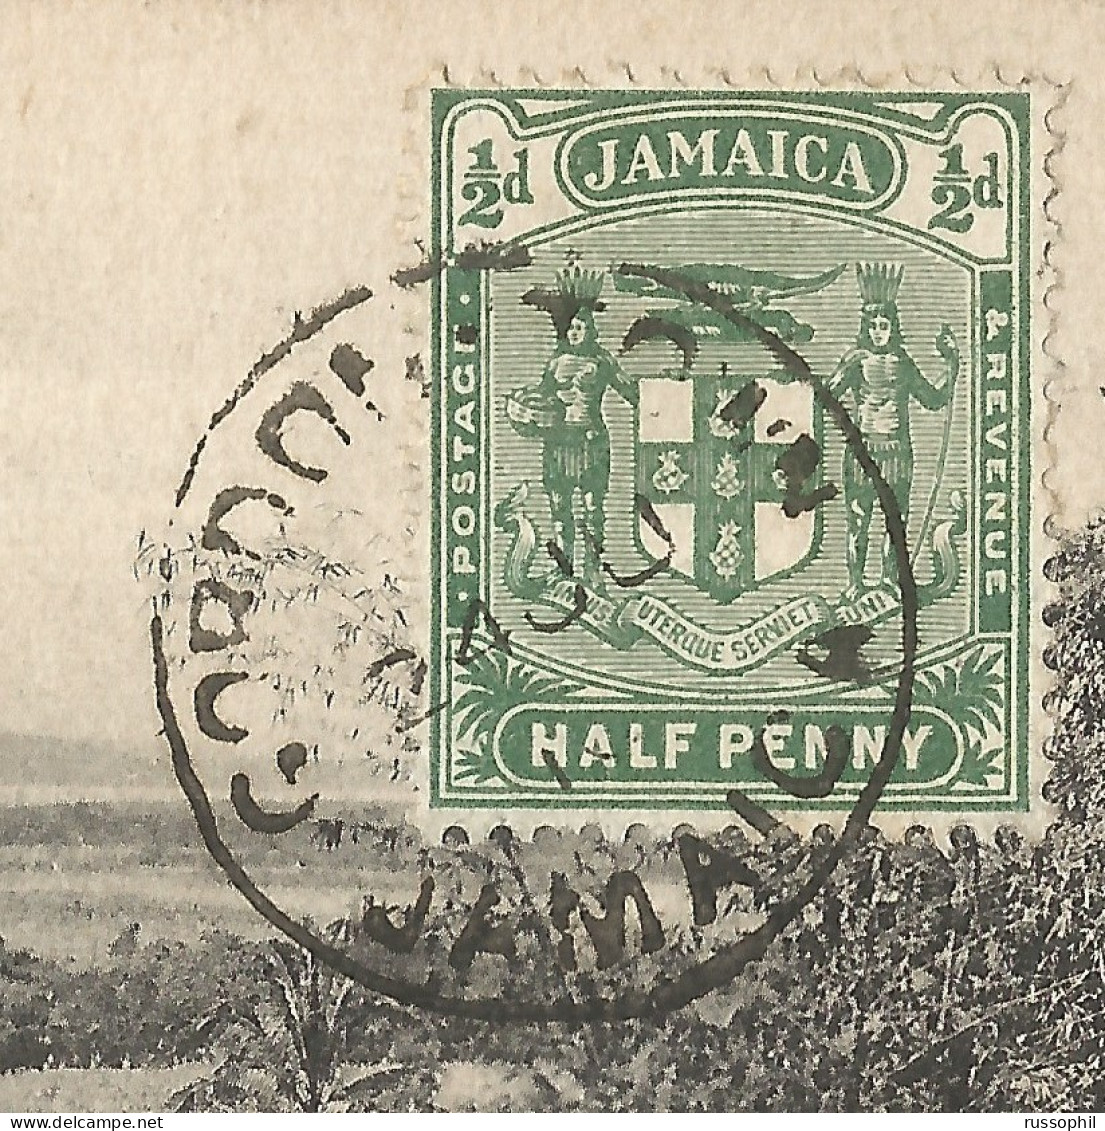 JAMAICA -  "GORDON TOWN" CDS ON FRANKED PC (VIEW OF CANE FIELDS) FROM KINGSTON TO BELGIUM - 1910 - Jamaïque (...-1961)